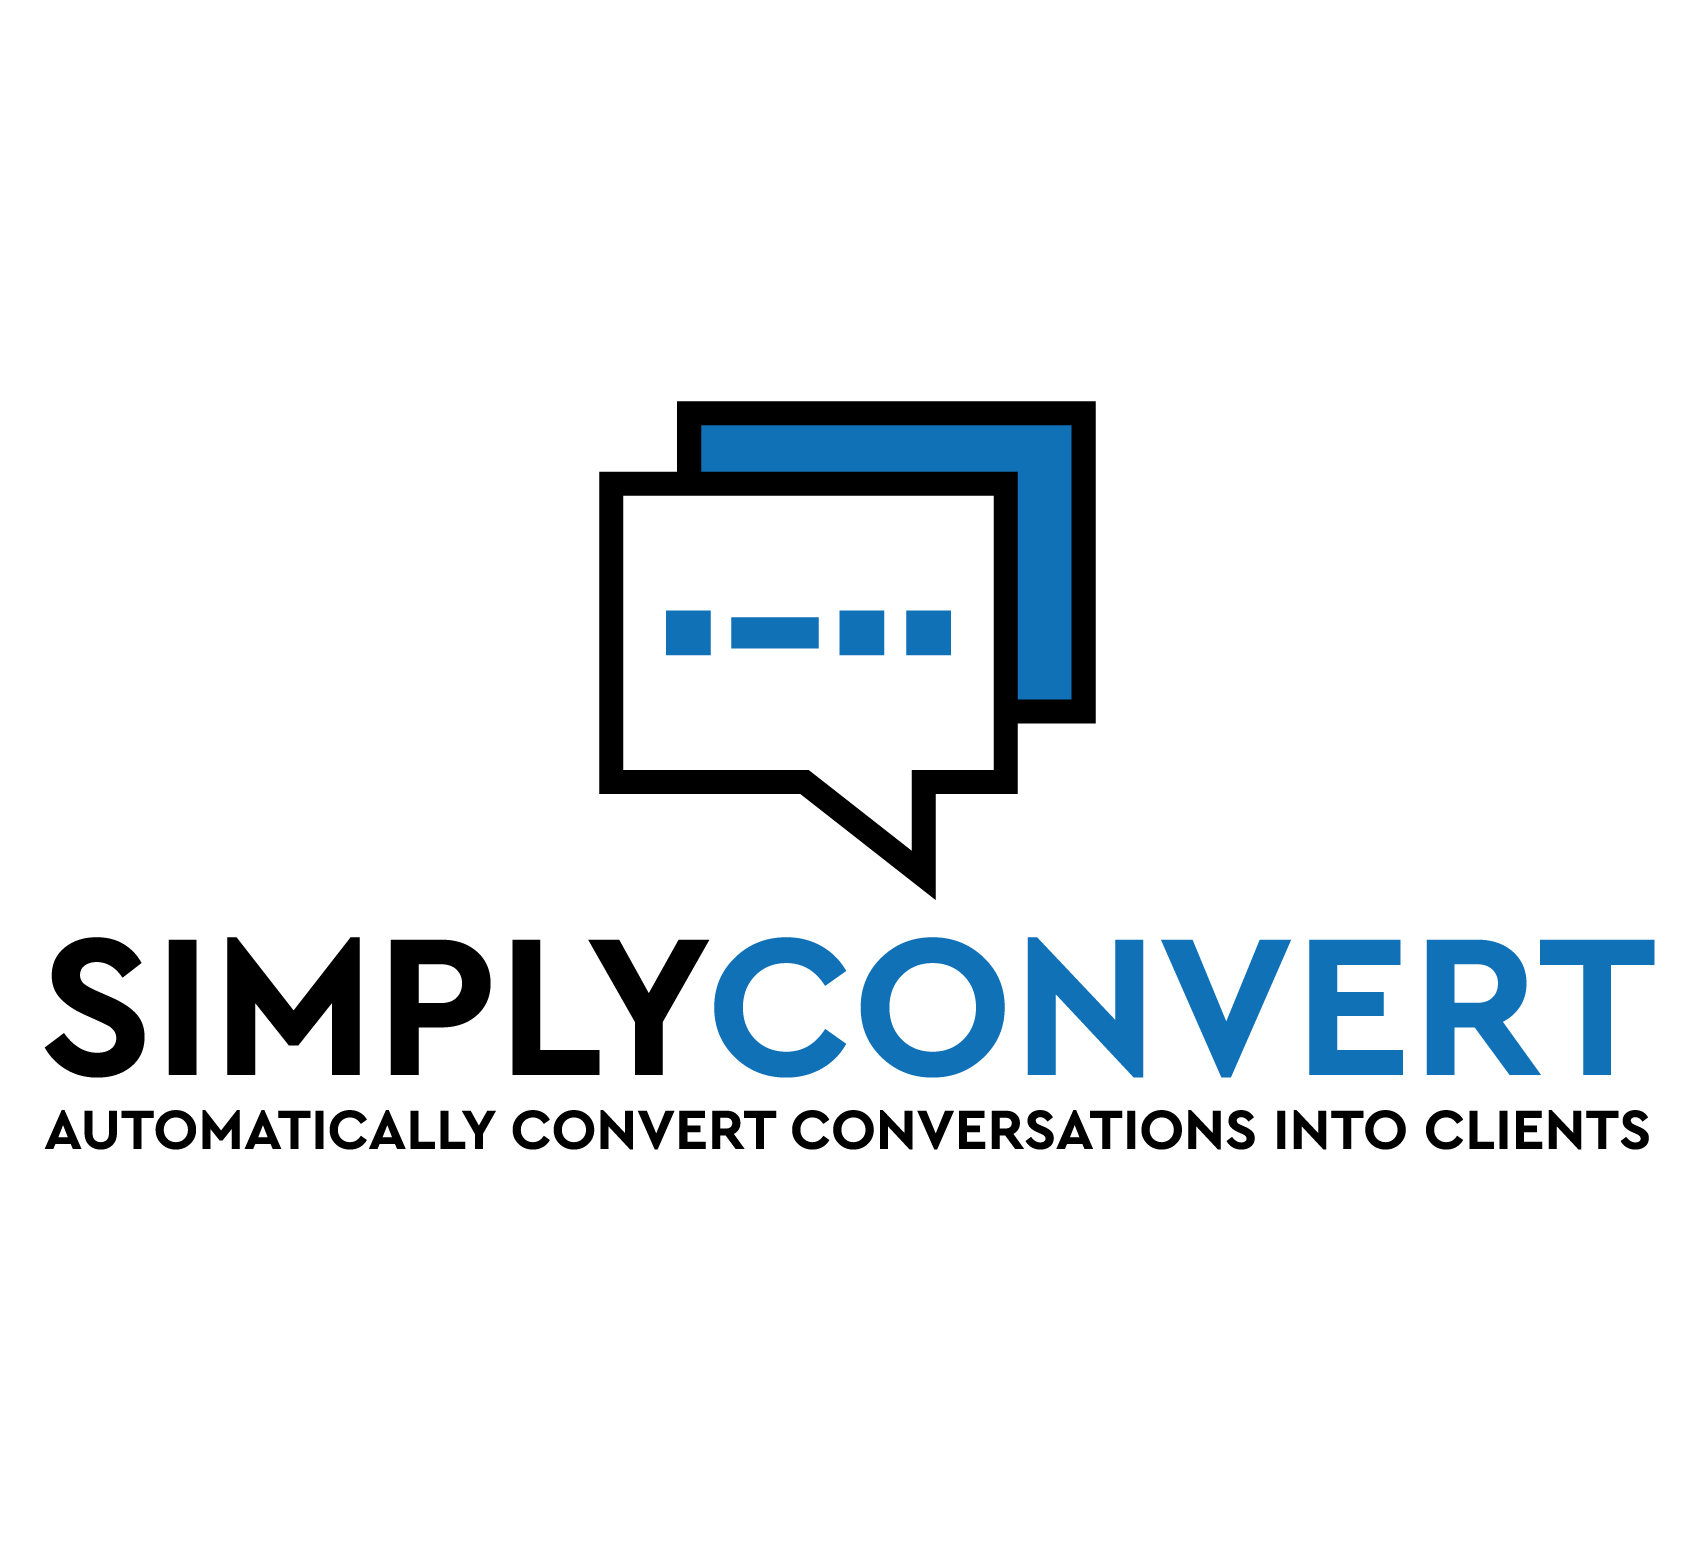 Text "Simply Convert" with a white speech bubble with blue dots above the text.